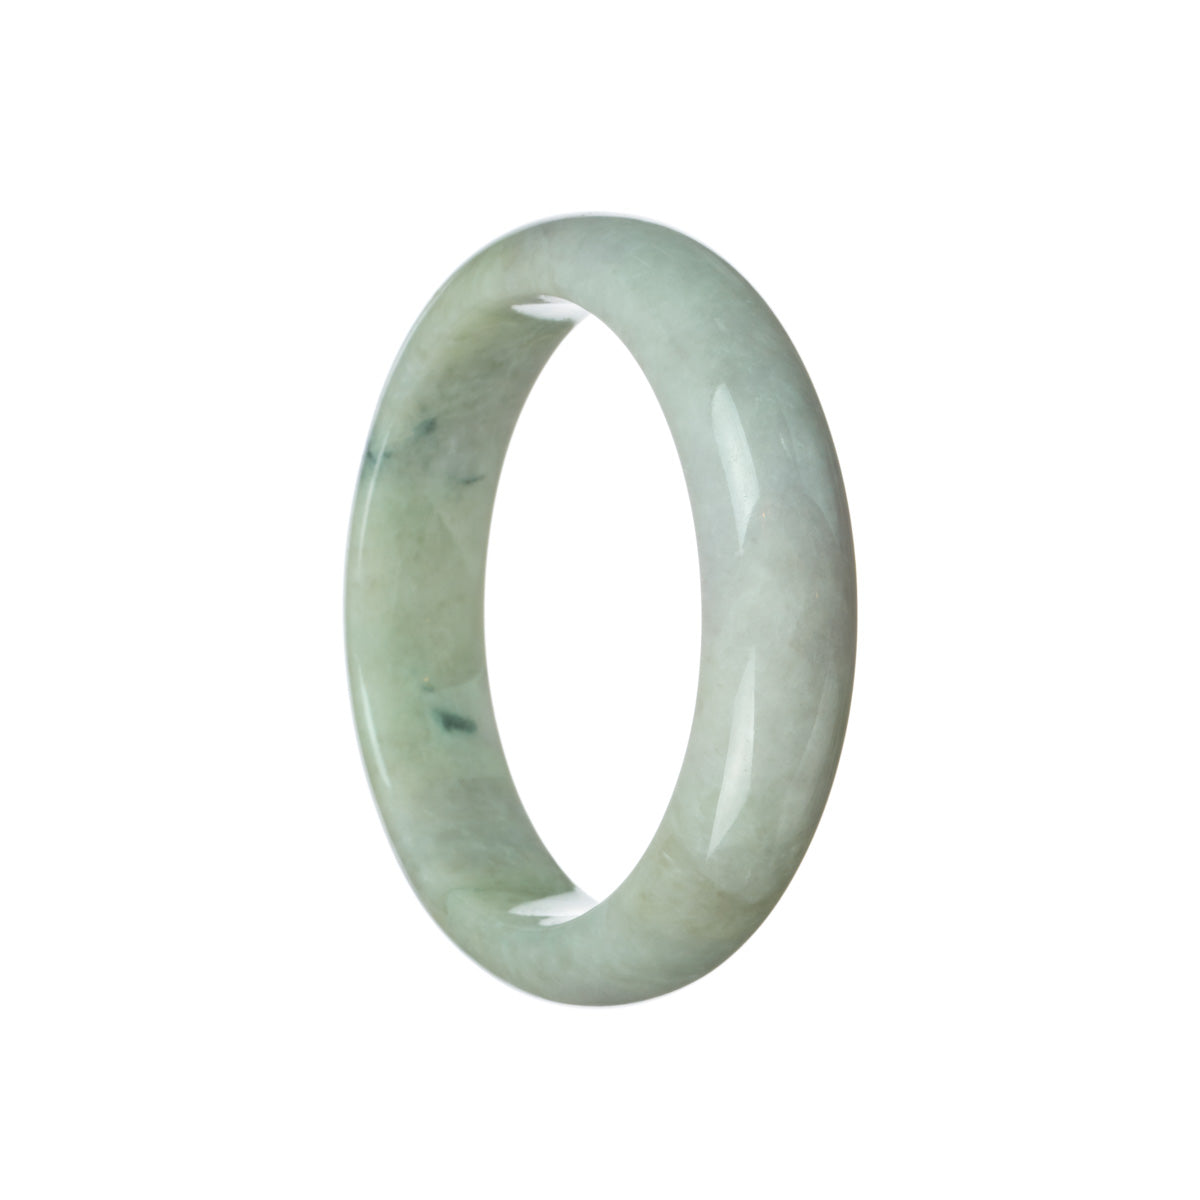 An elegant half moon-shaped jade bangle bracelet in a pale green with hints of lavender. The bracelet exudes a natural and authentic charm.